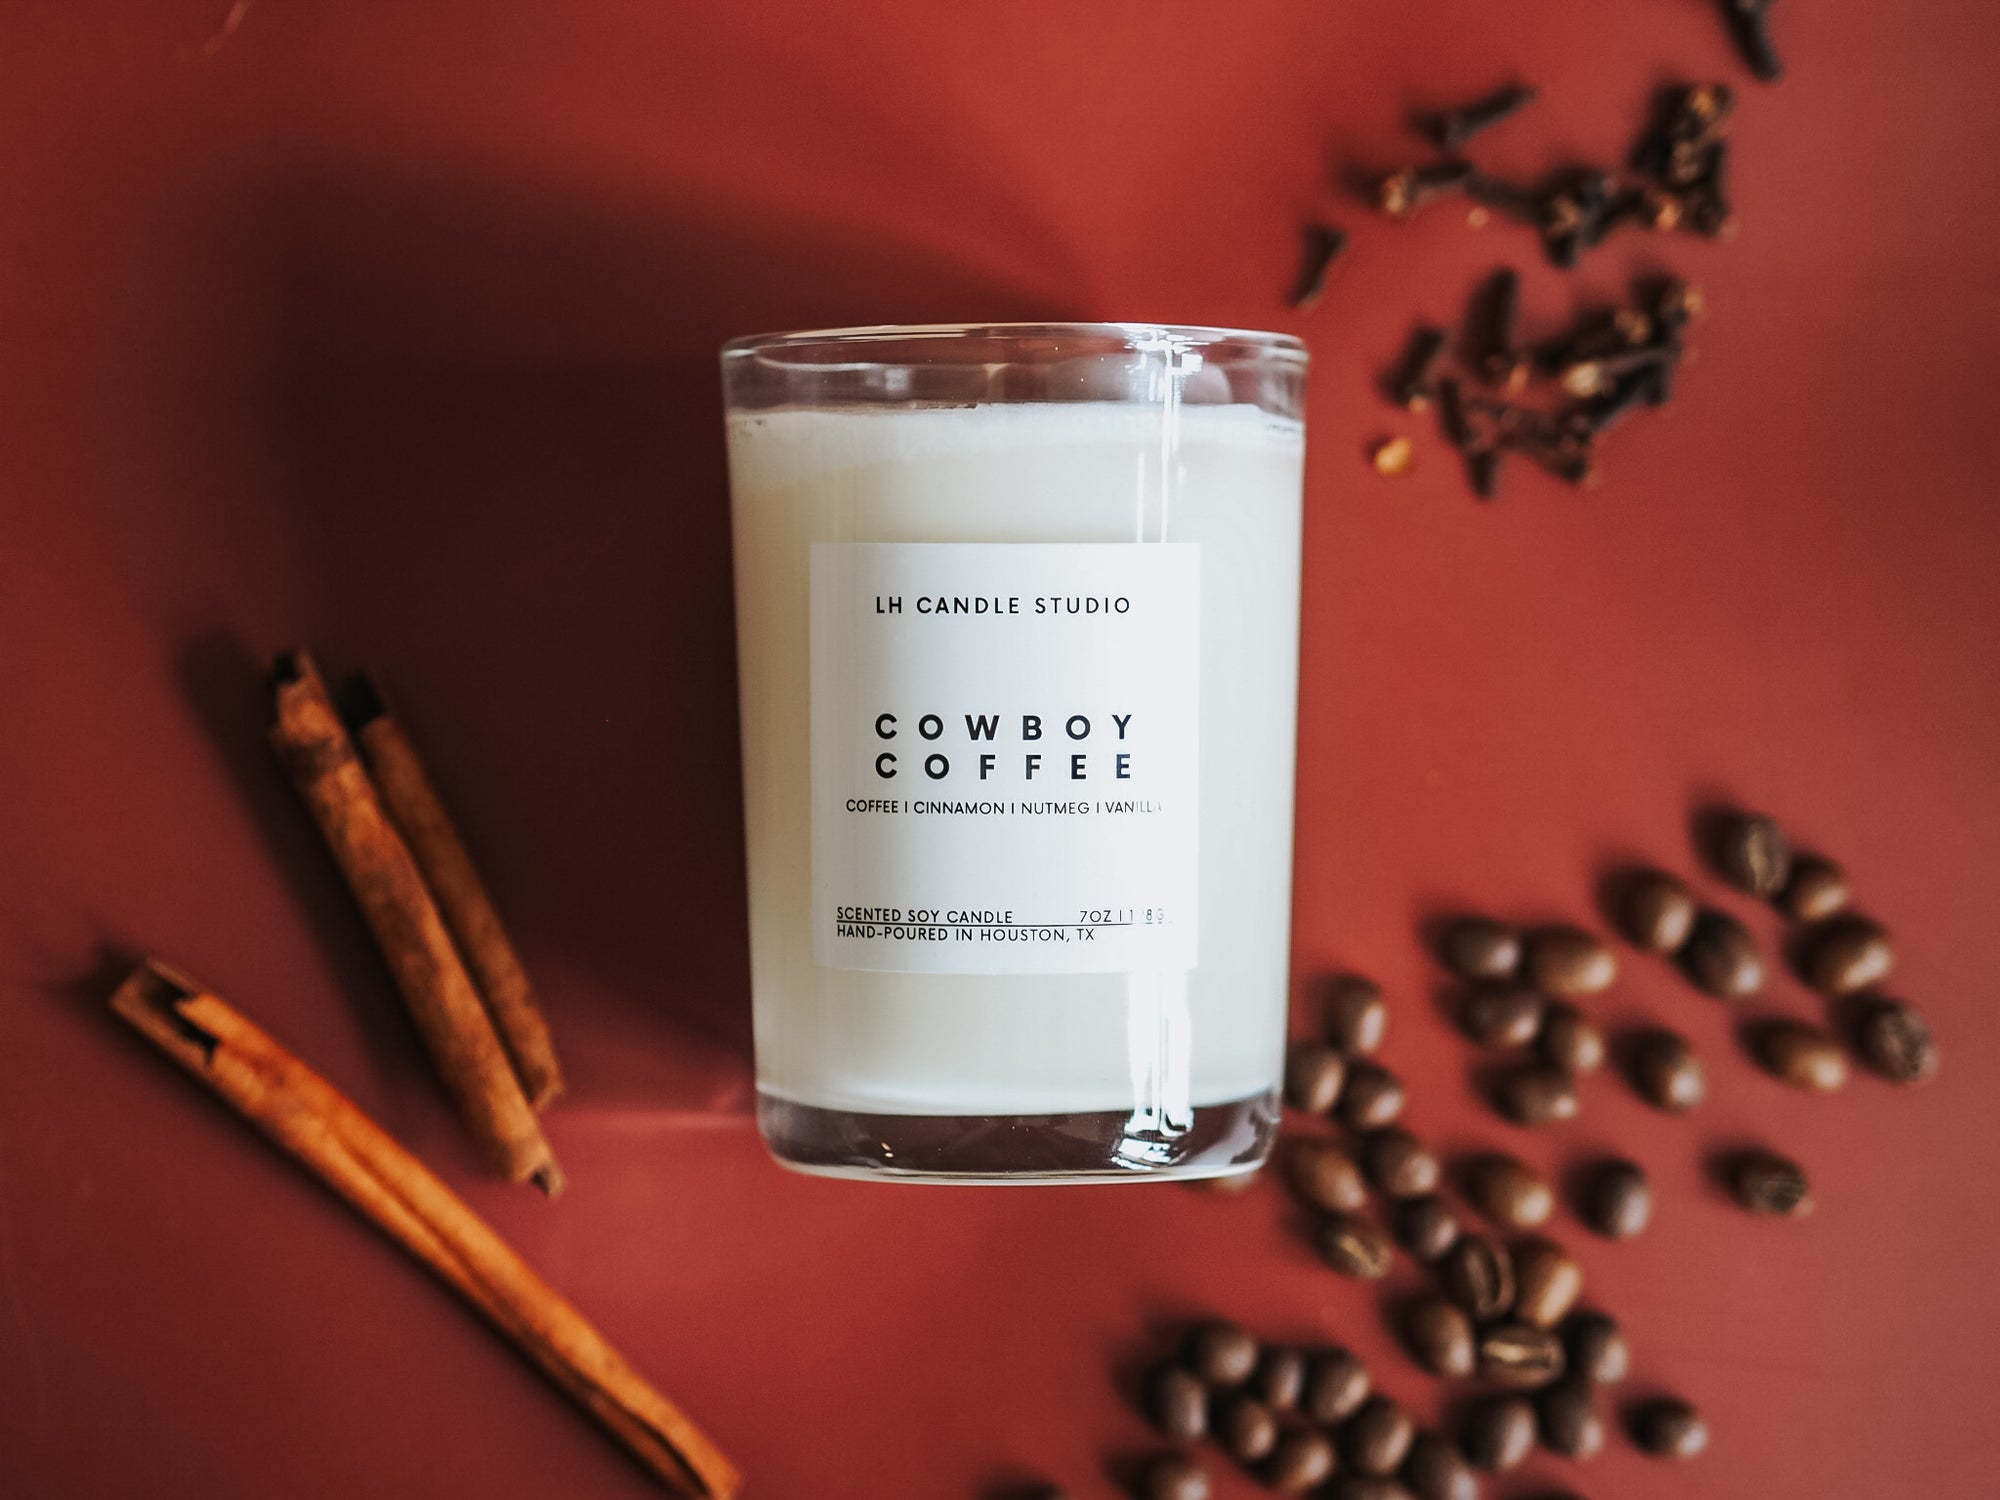 Cowboy Coffee Candle - LH CANDLE STUDIO